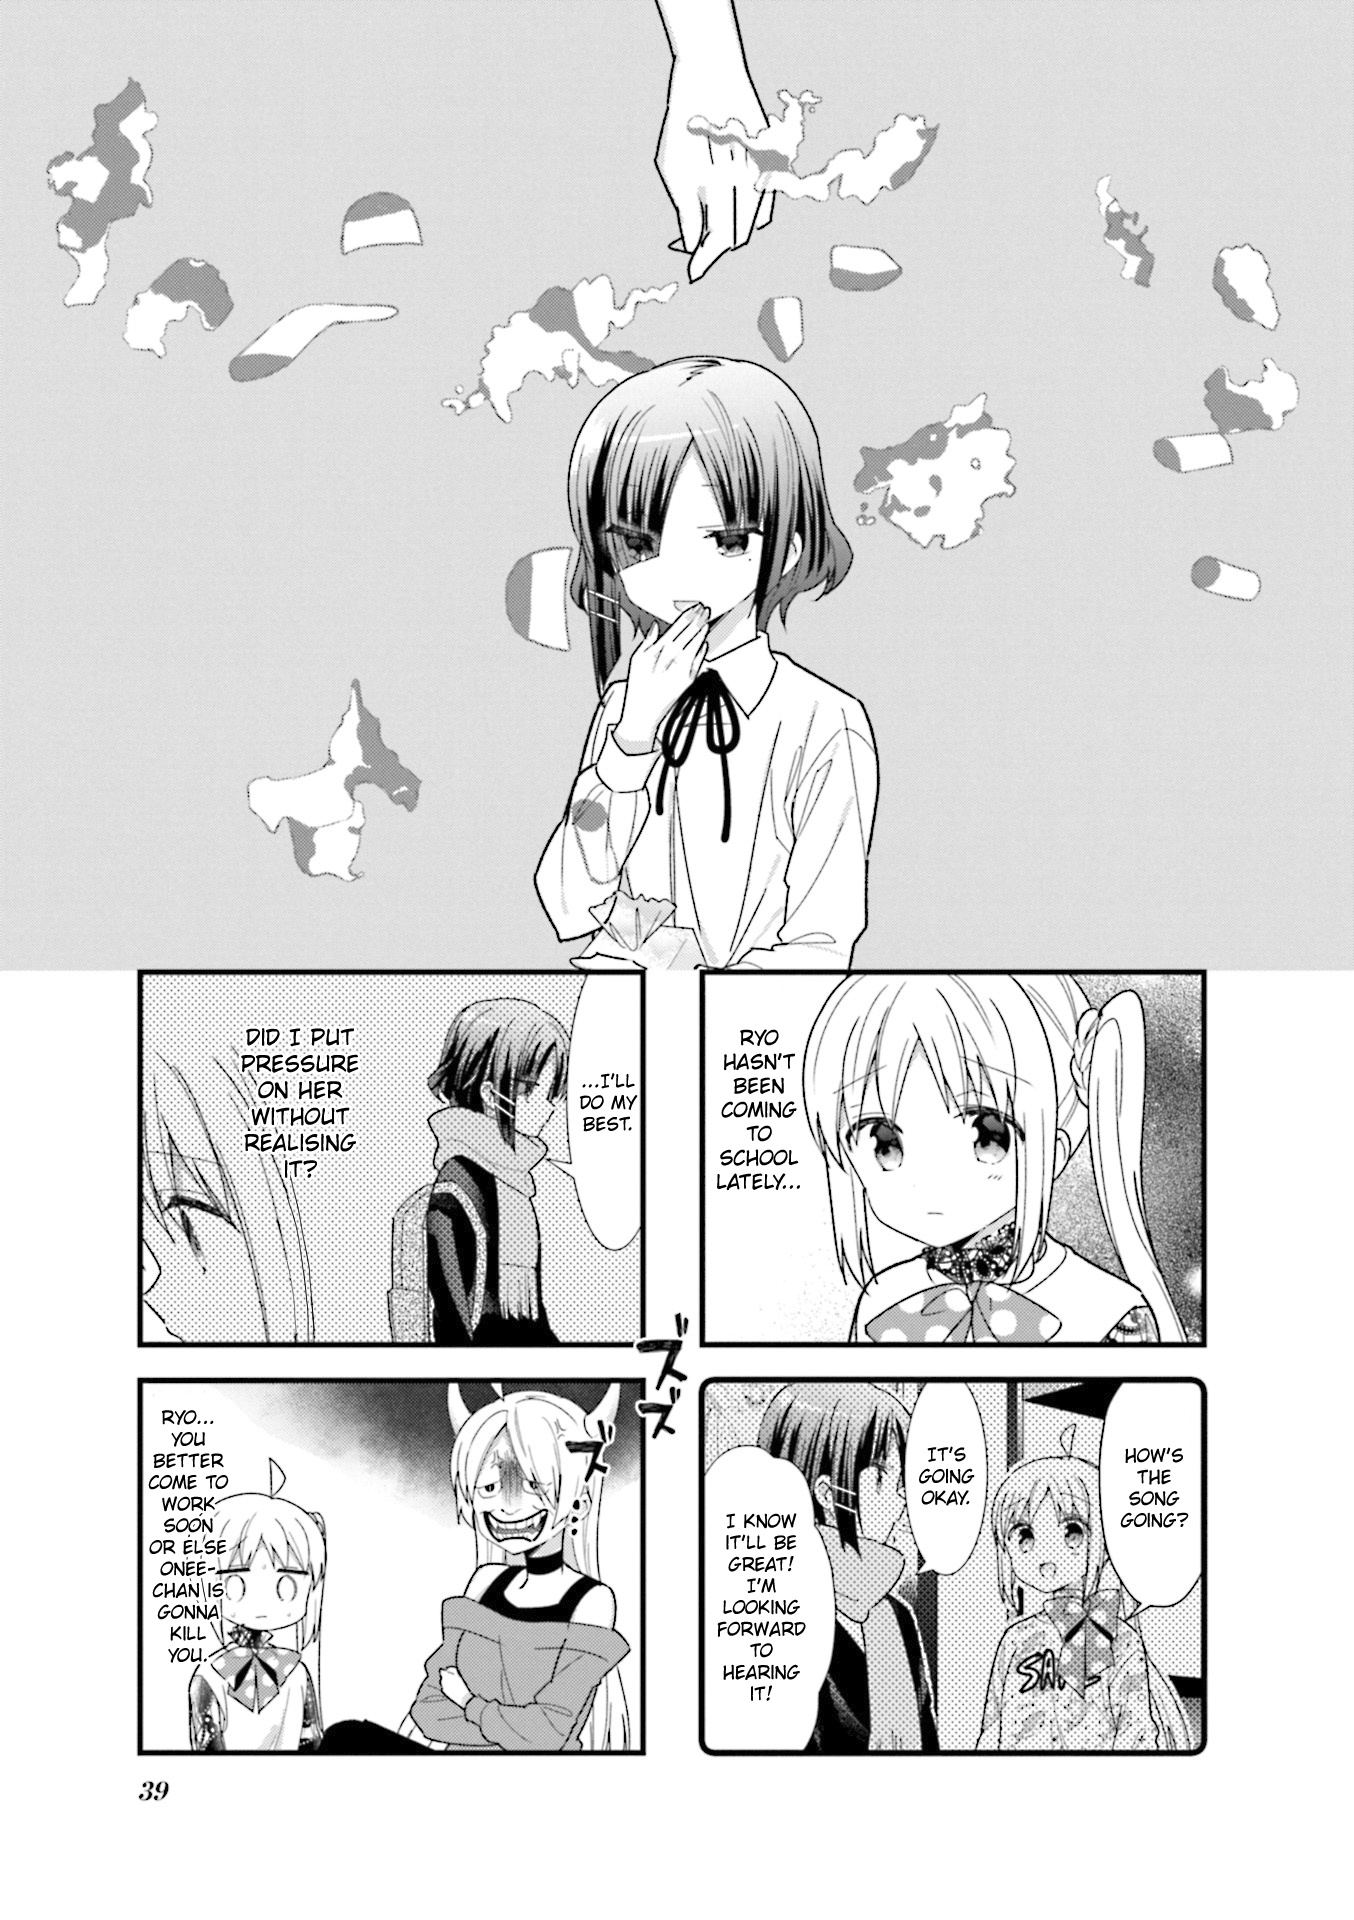 Bocchi The Rock Vol.3 Chapter 30